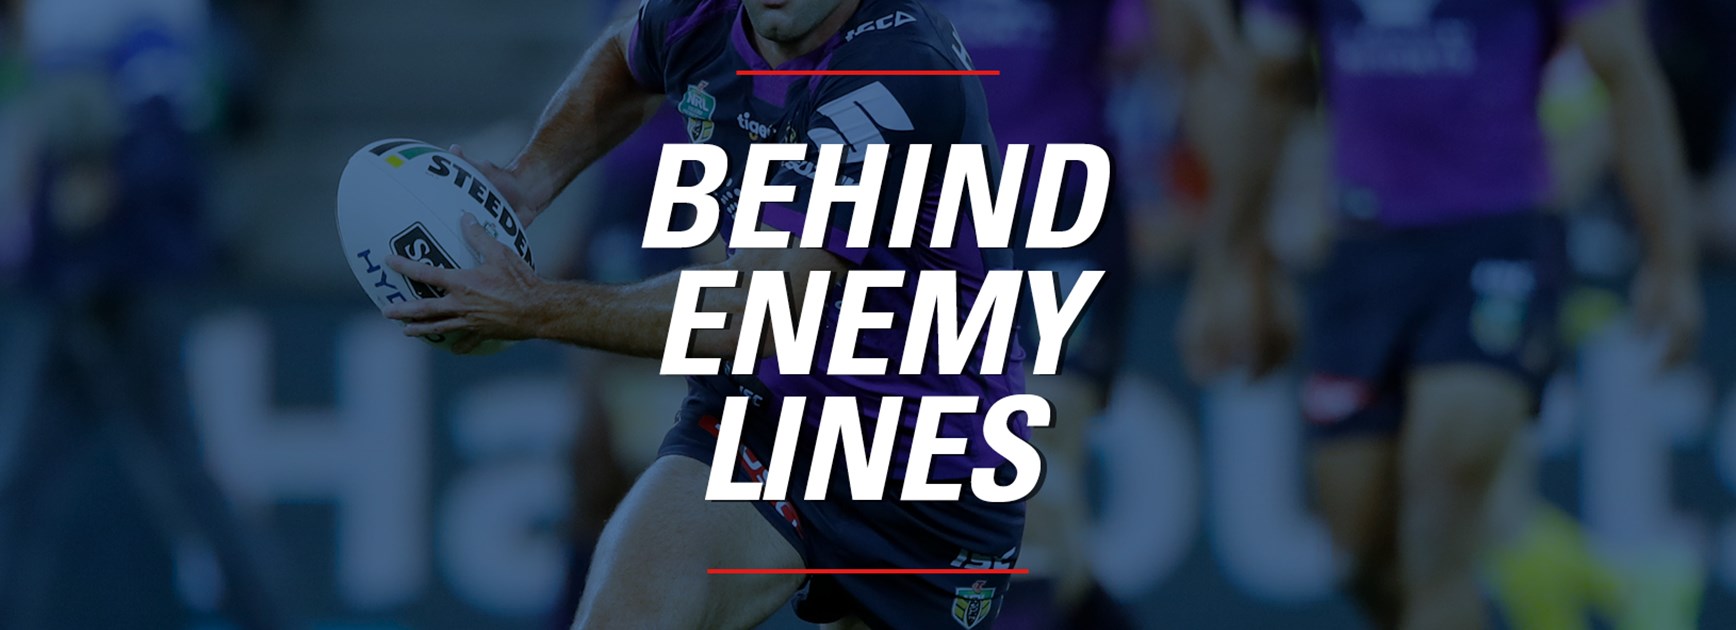 Behind Enemy Lines: Slater's injury concern and Hoffman's cautious approach